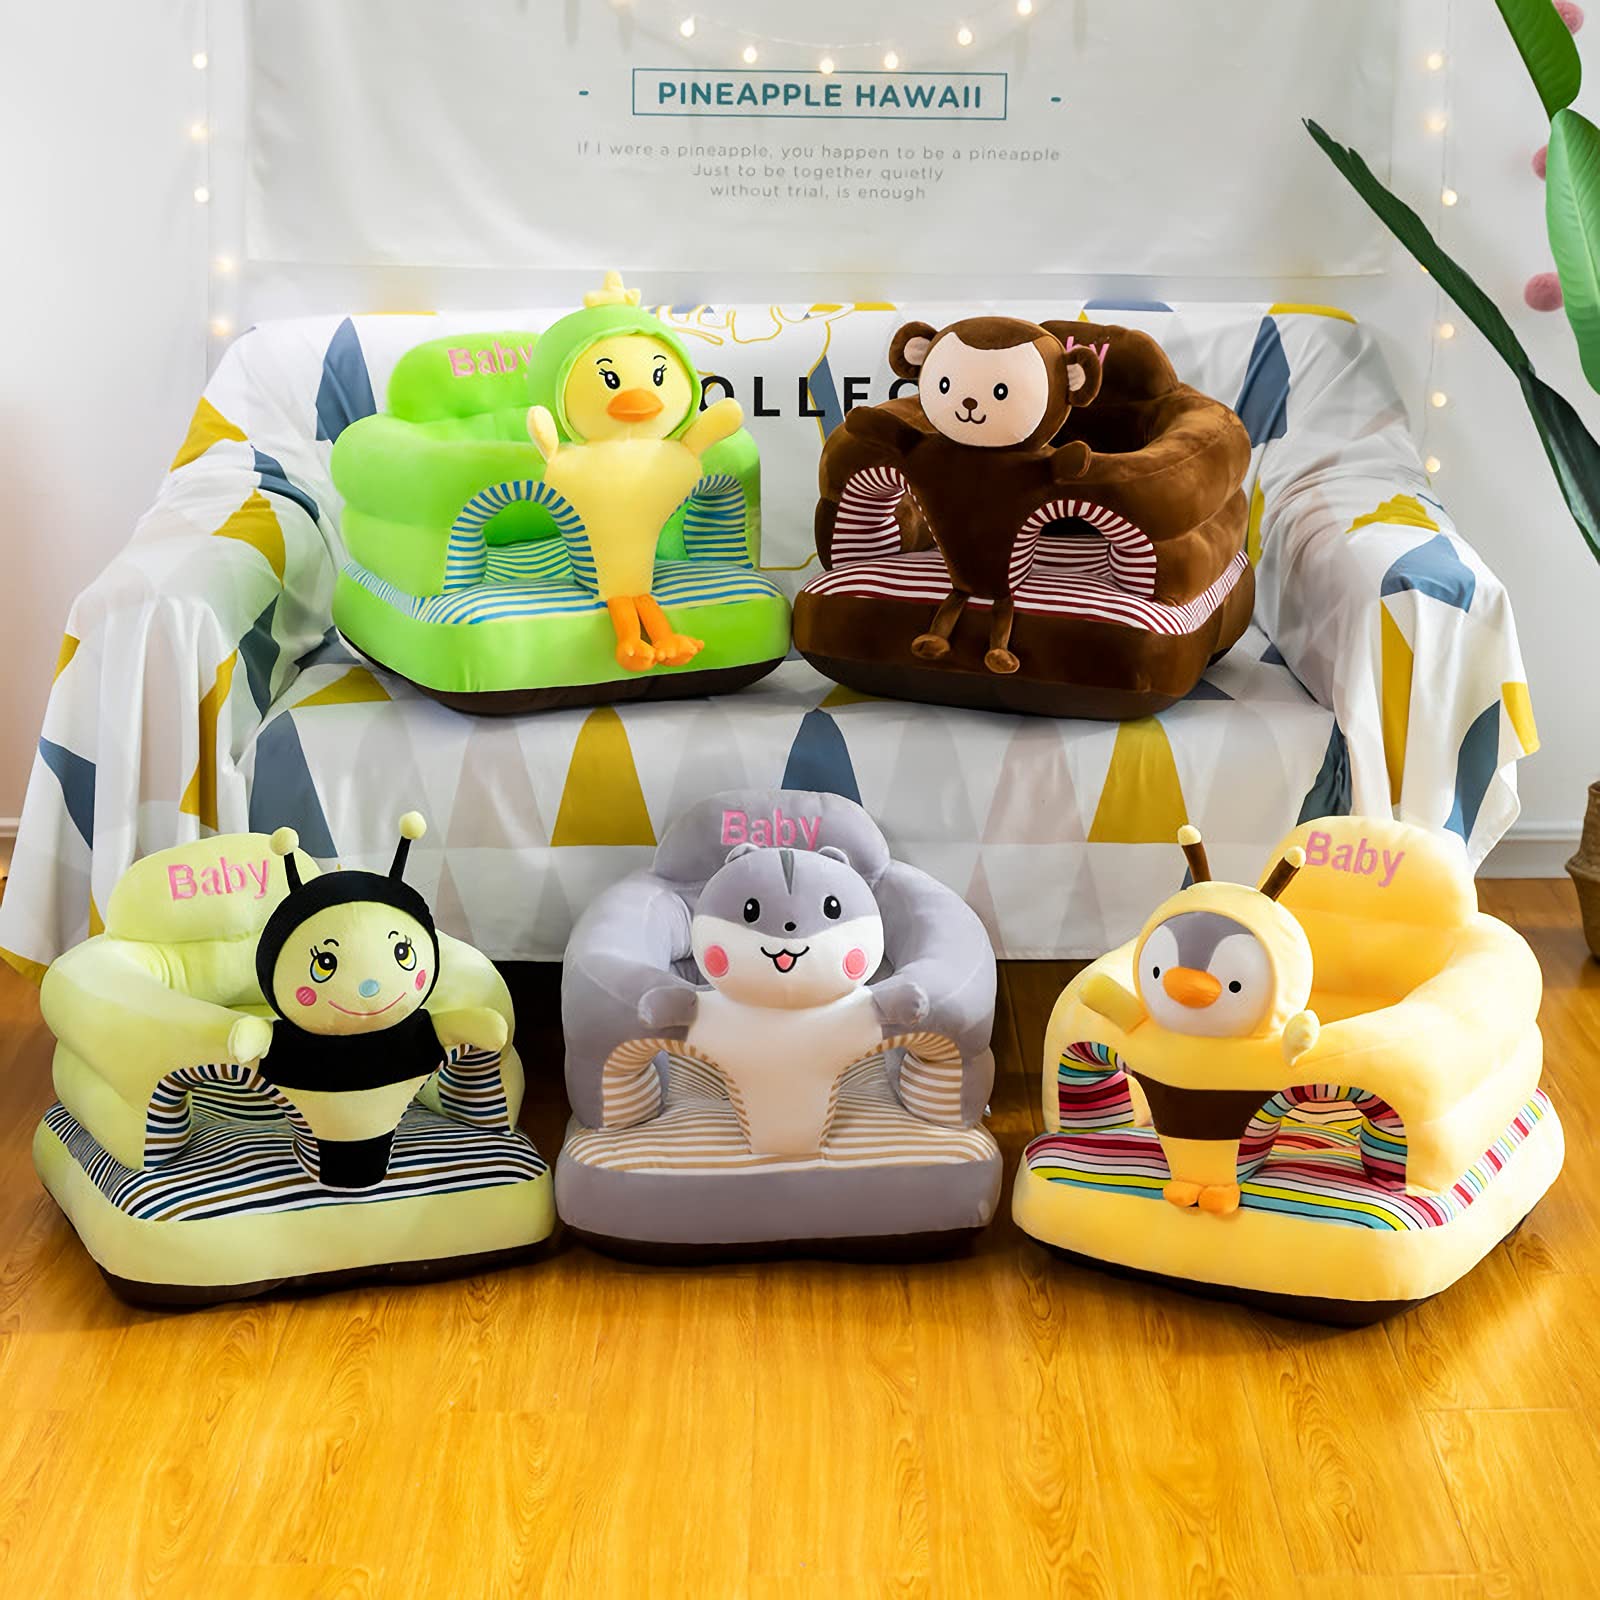 Baby Support Seat, Cute Baby Sofa Chair for Sitting Up, Comfy Plush Infant Seats (Penguin,W17.5 x H17.5)